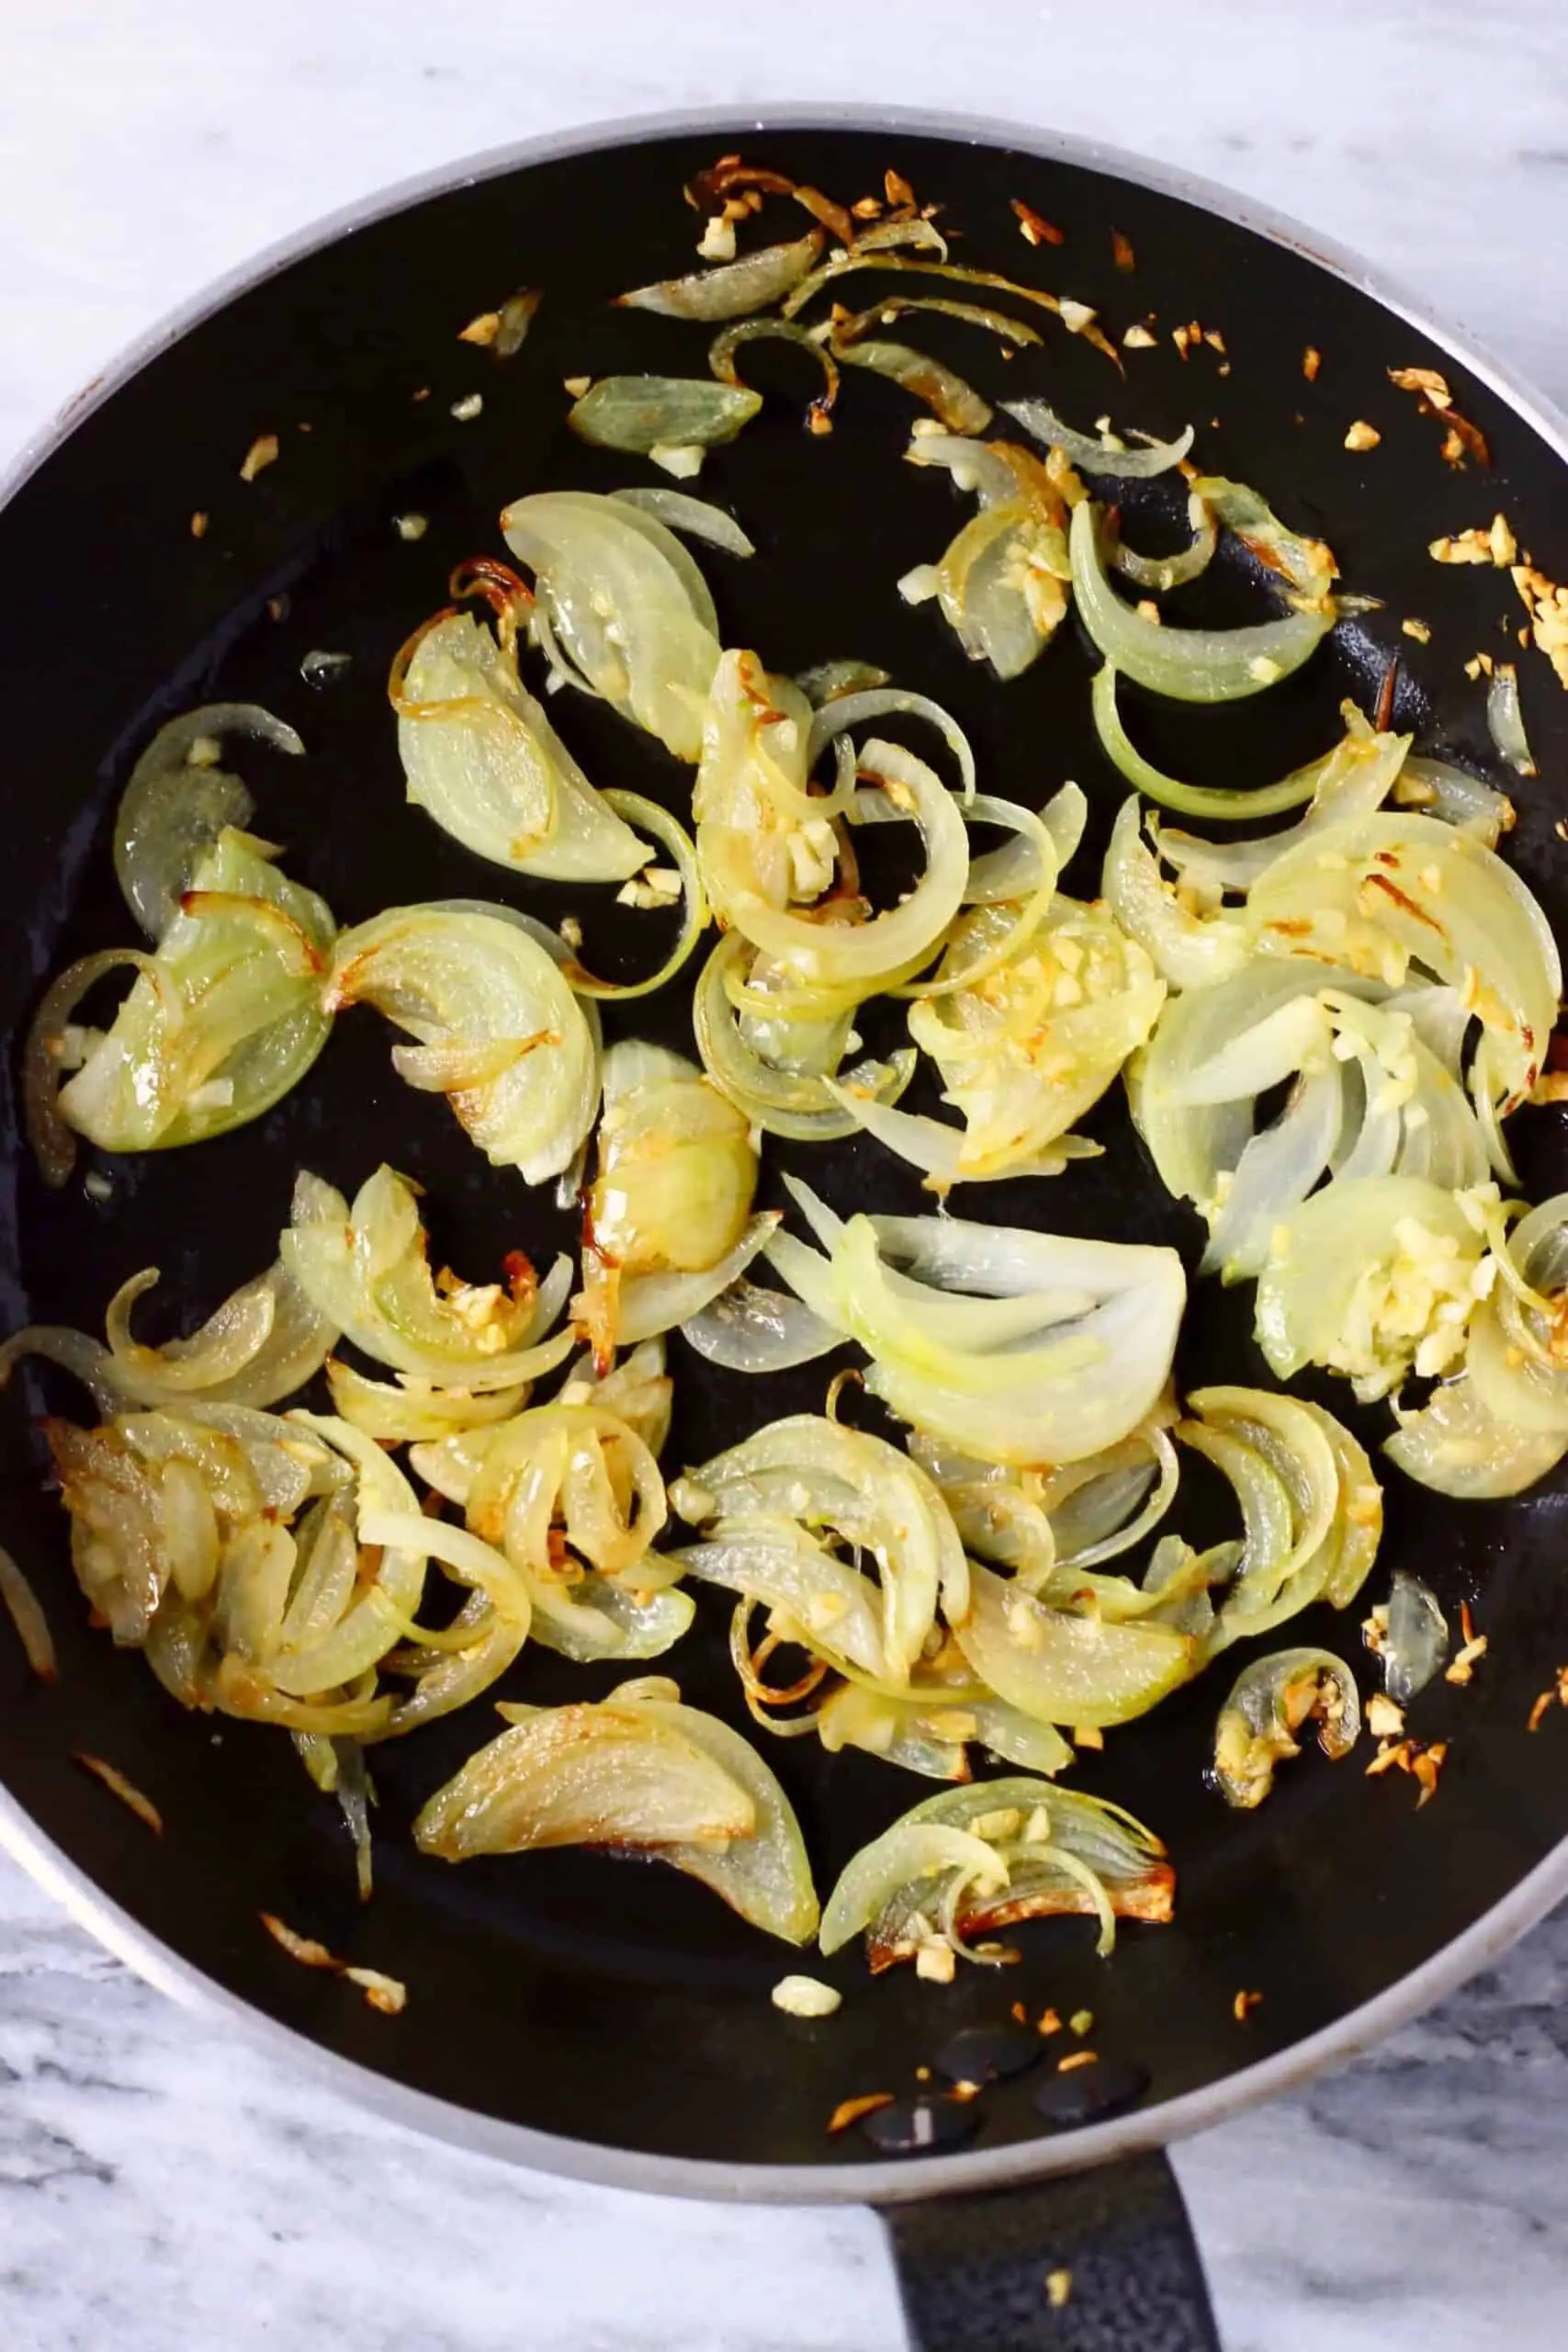 Sliced onions and minced garlic being fried in a frying pan